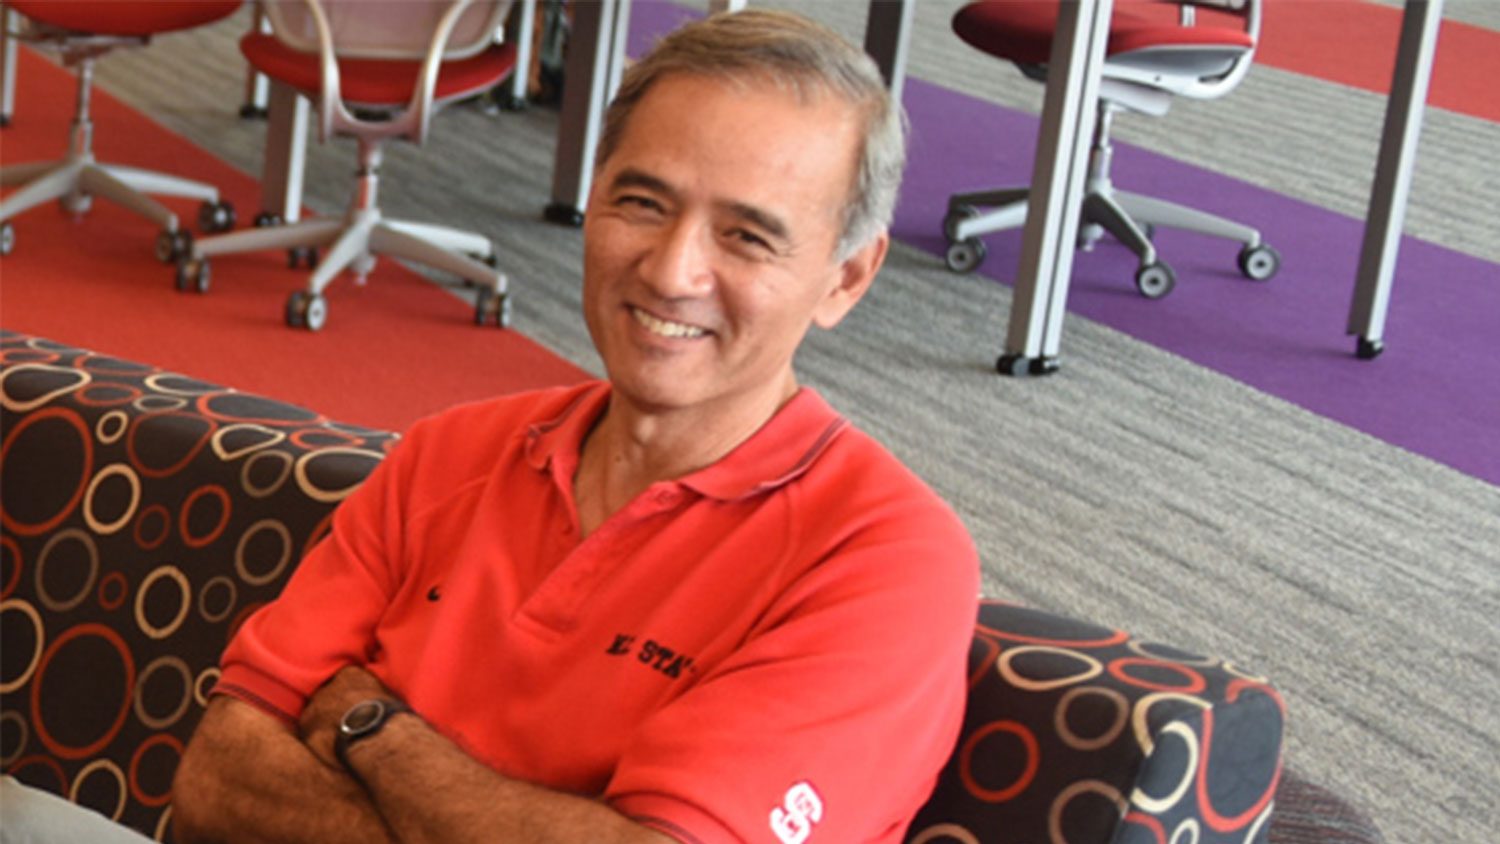 Male faculty member smiling during a meeting